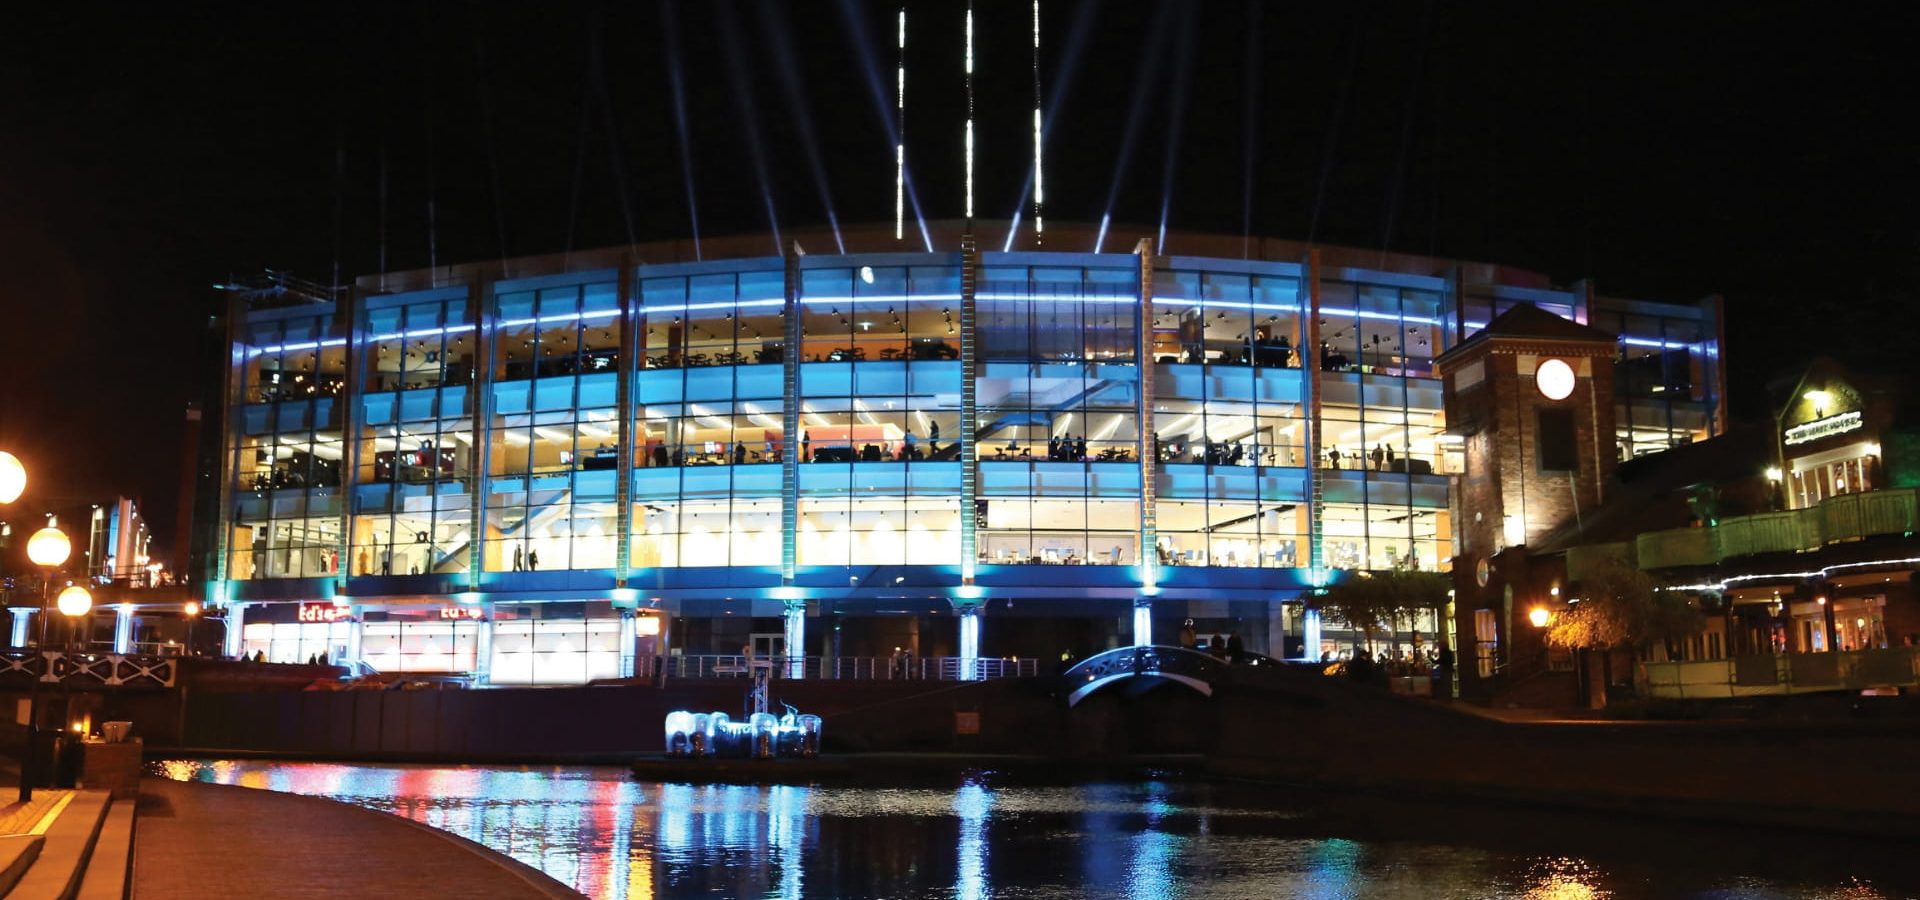 Exterior of Arena Birmingham at night from the canal.